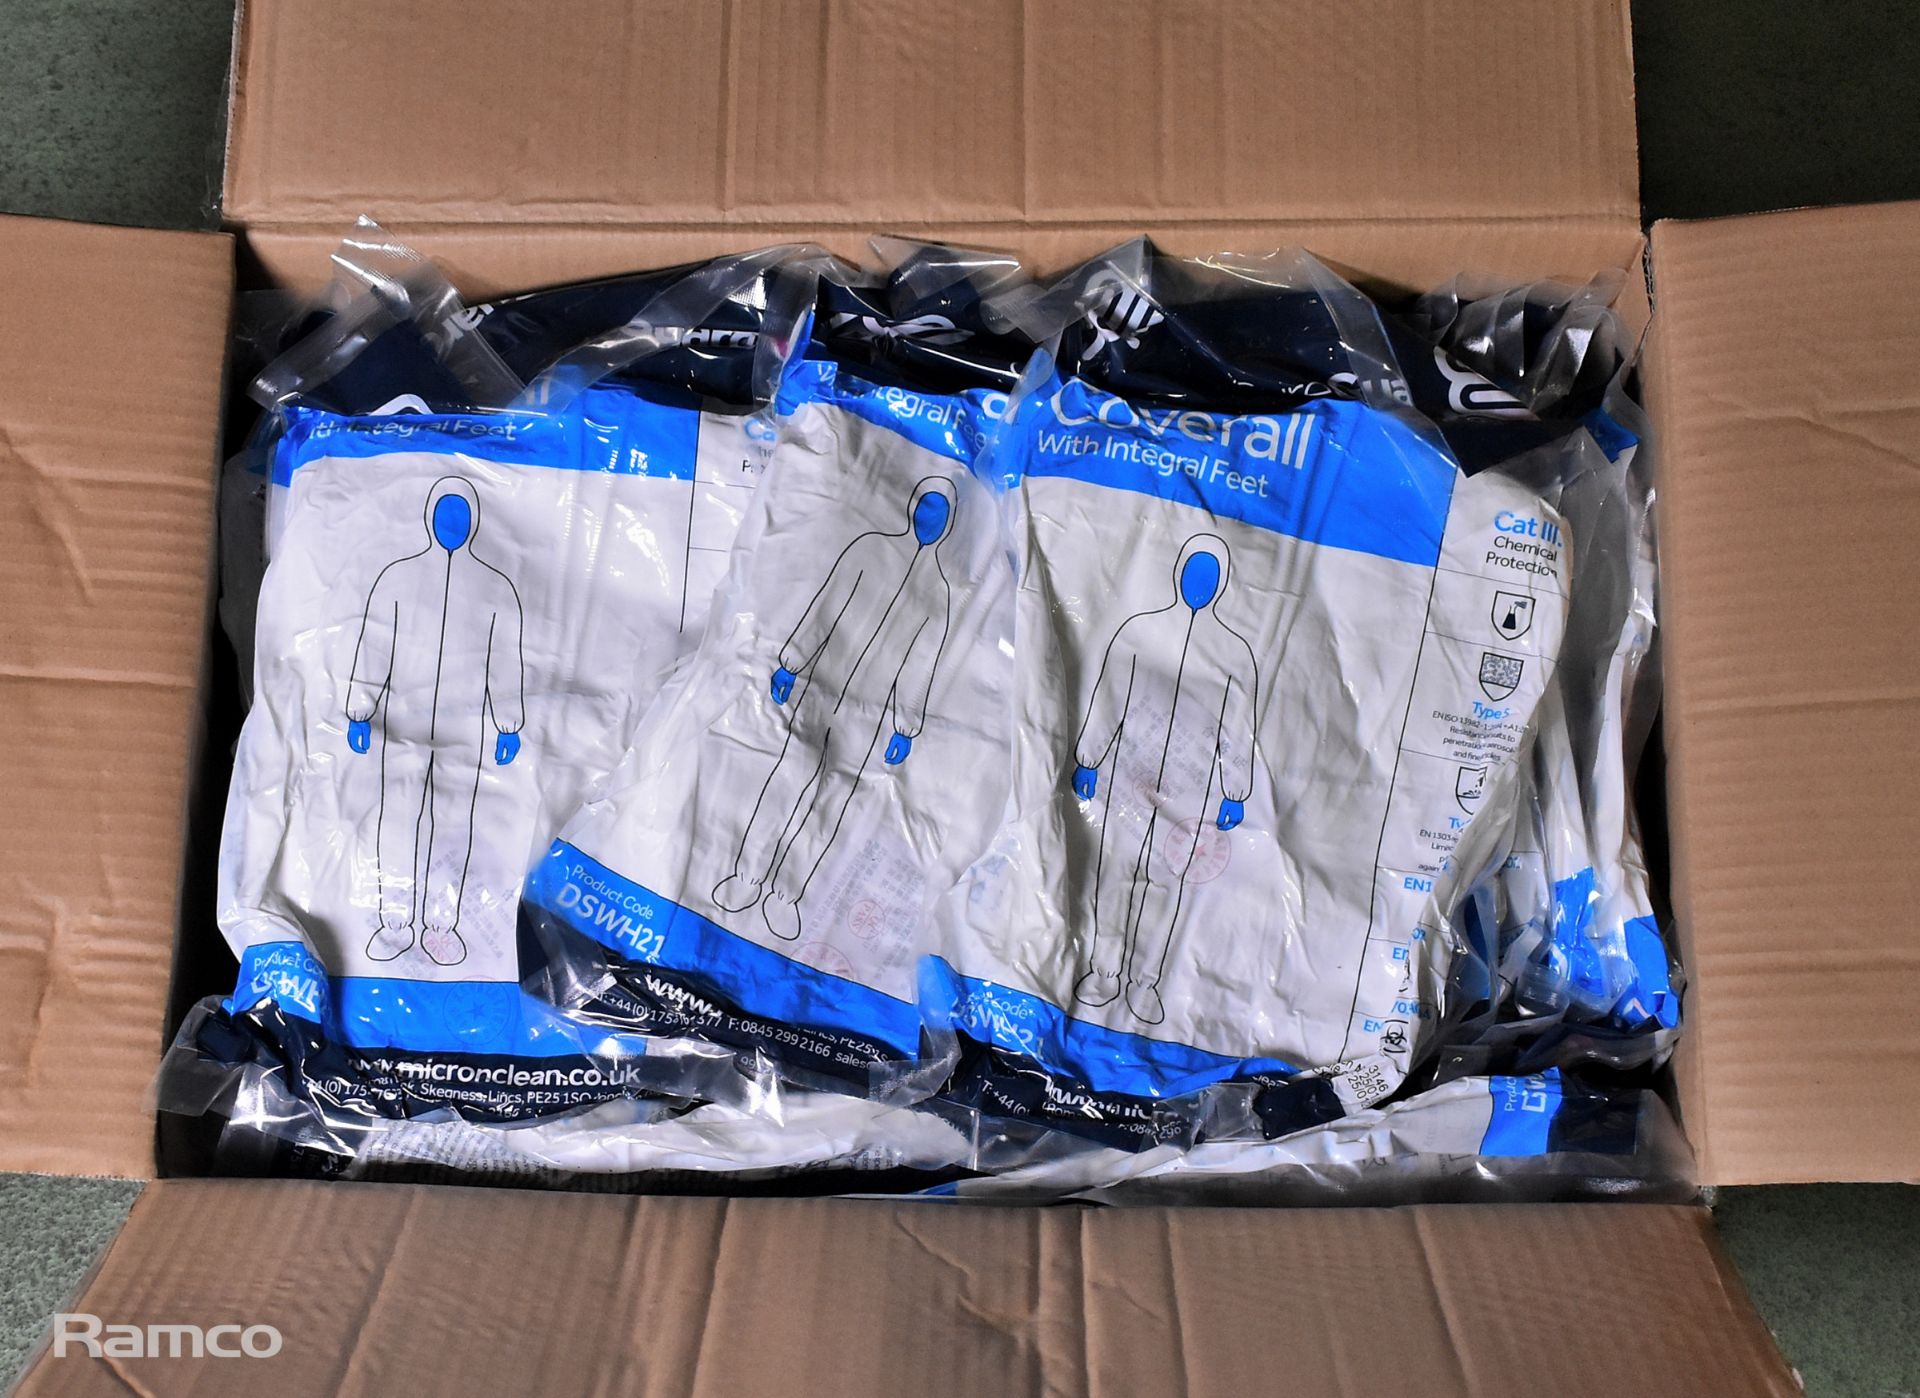 2x boxes of MicroClean SureGuard 3 coveralls with integral feet - size X Large - 25 units per box - Image 2 of 4